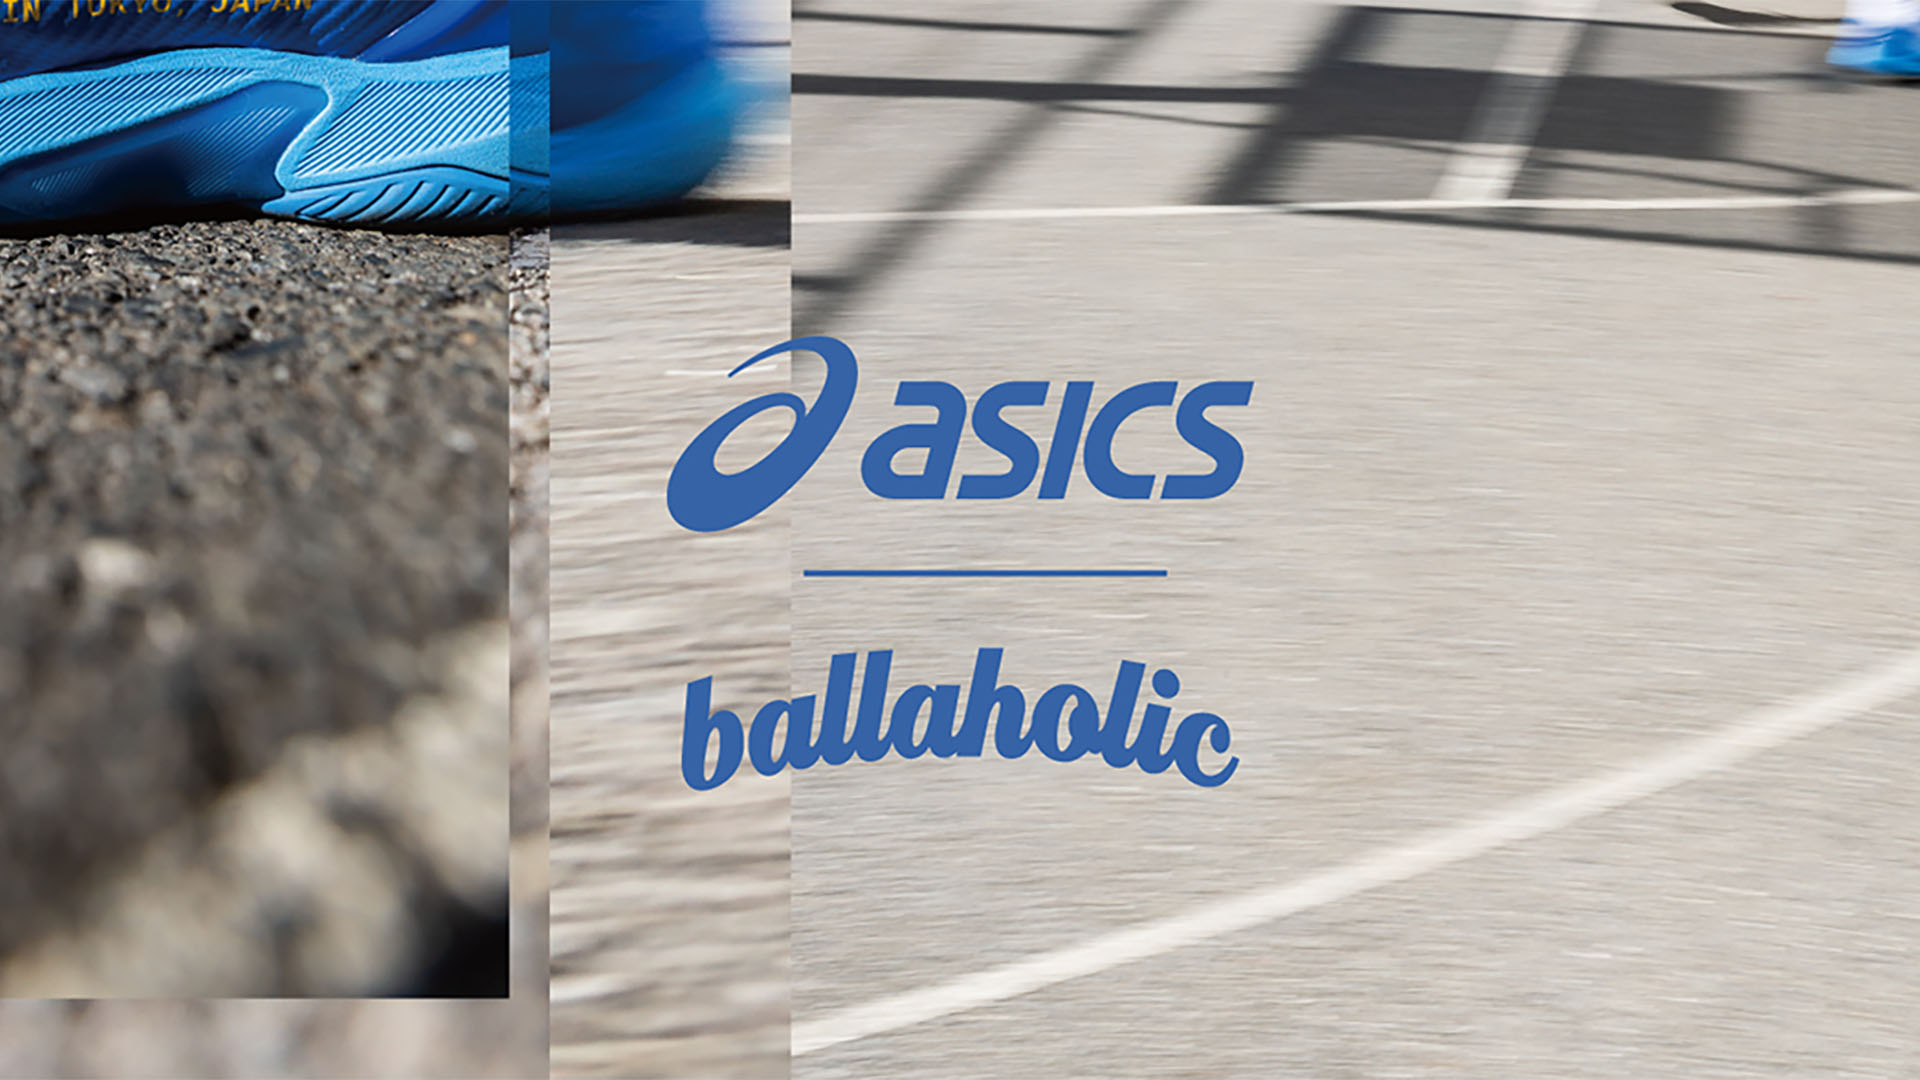 ASICS x ballaholic Collaboration Project ｜ FLY BASKETBALL CULTURE 